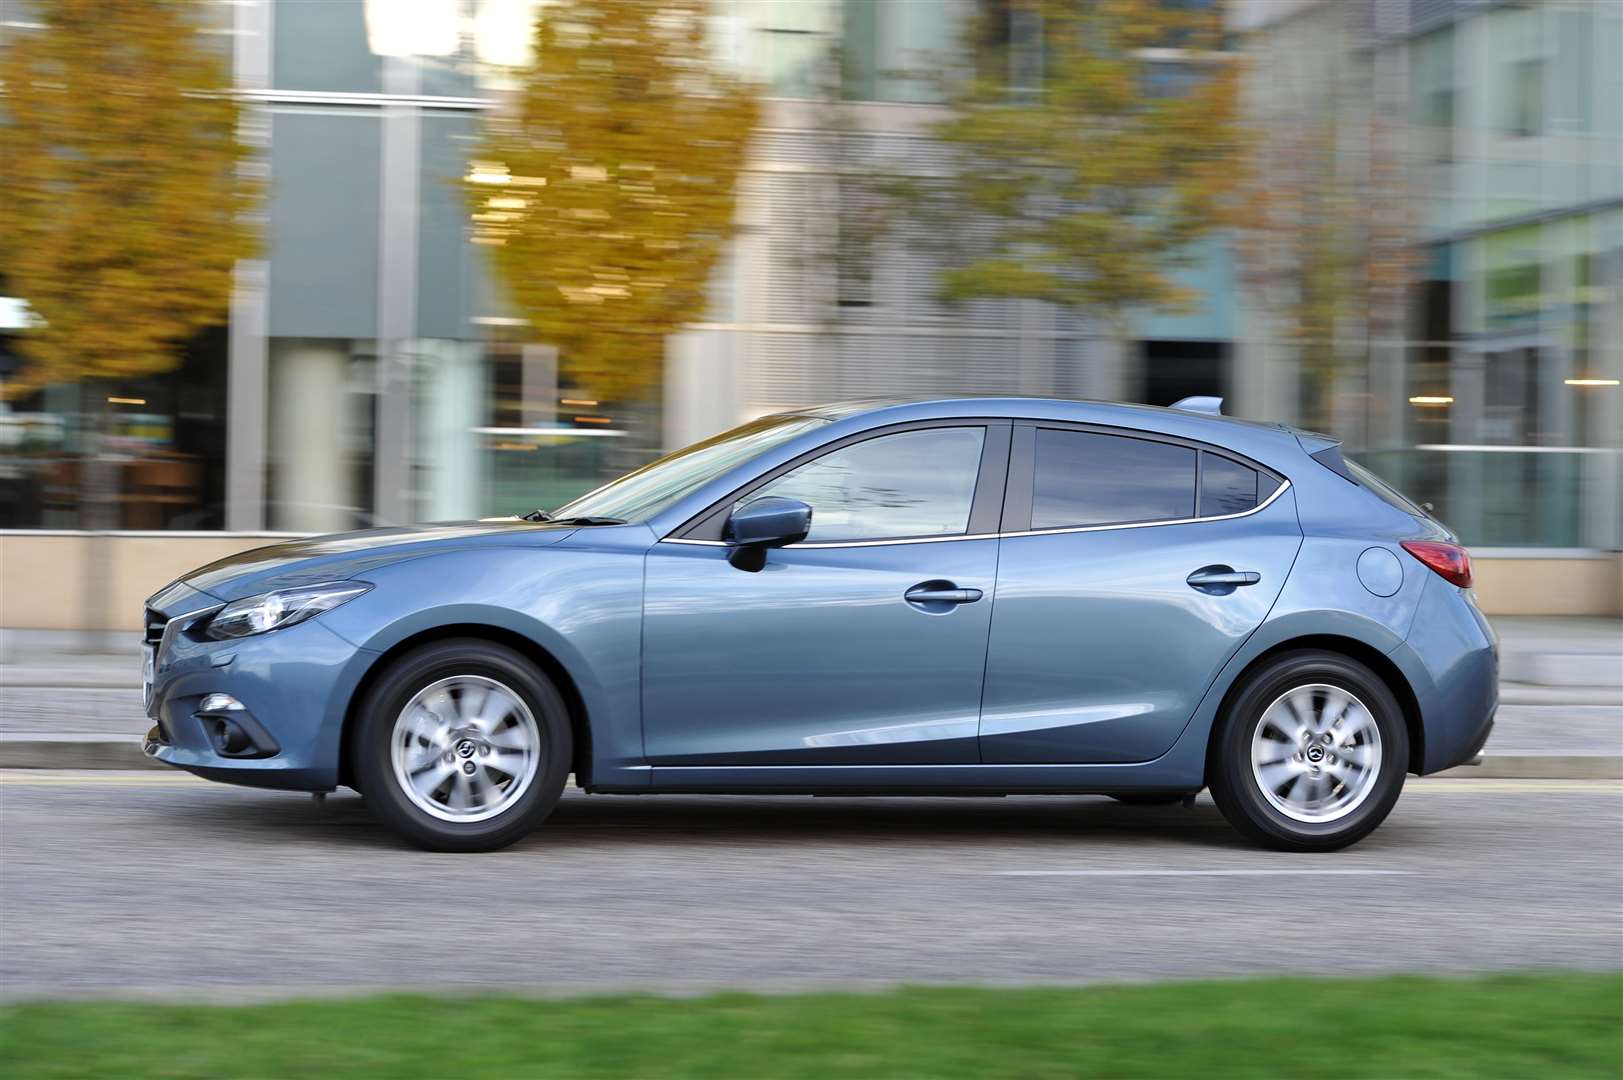 All Mazda3s have alloy wheels (6912388)